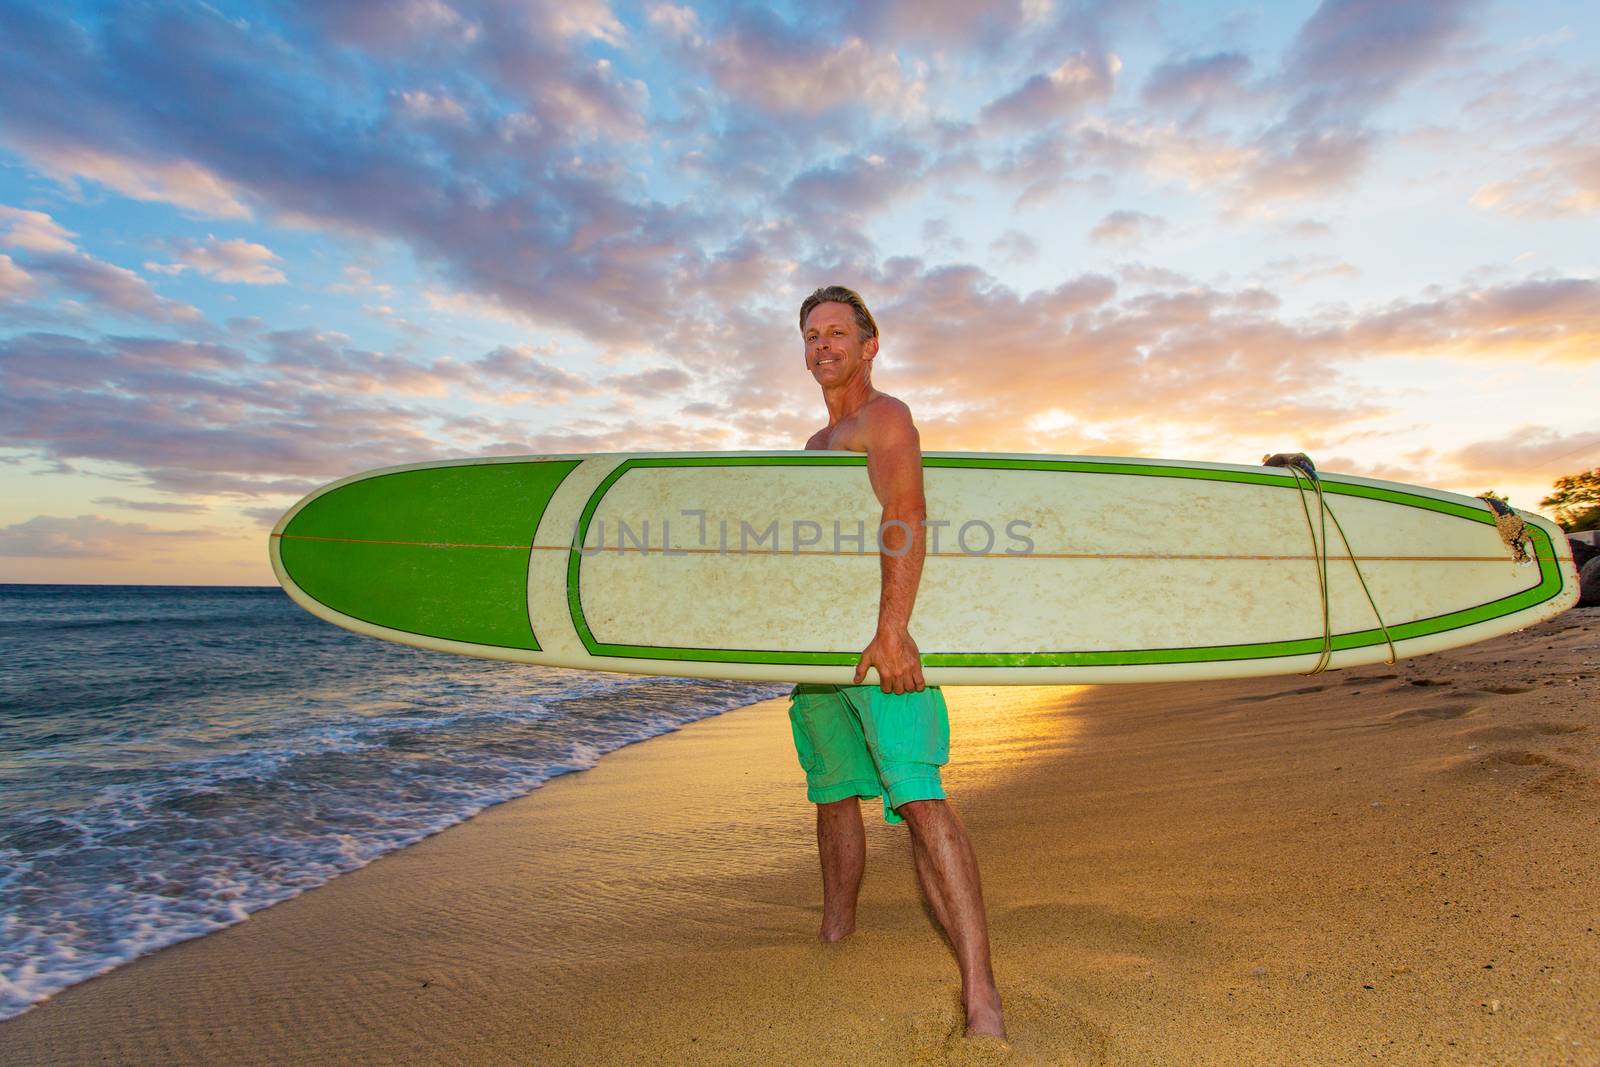 Athletic upbeat adult holding his surfboard on beach at sunset